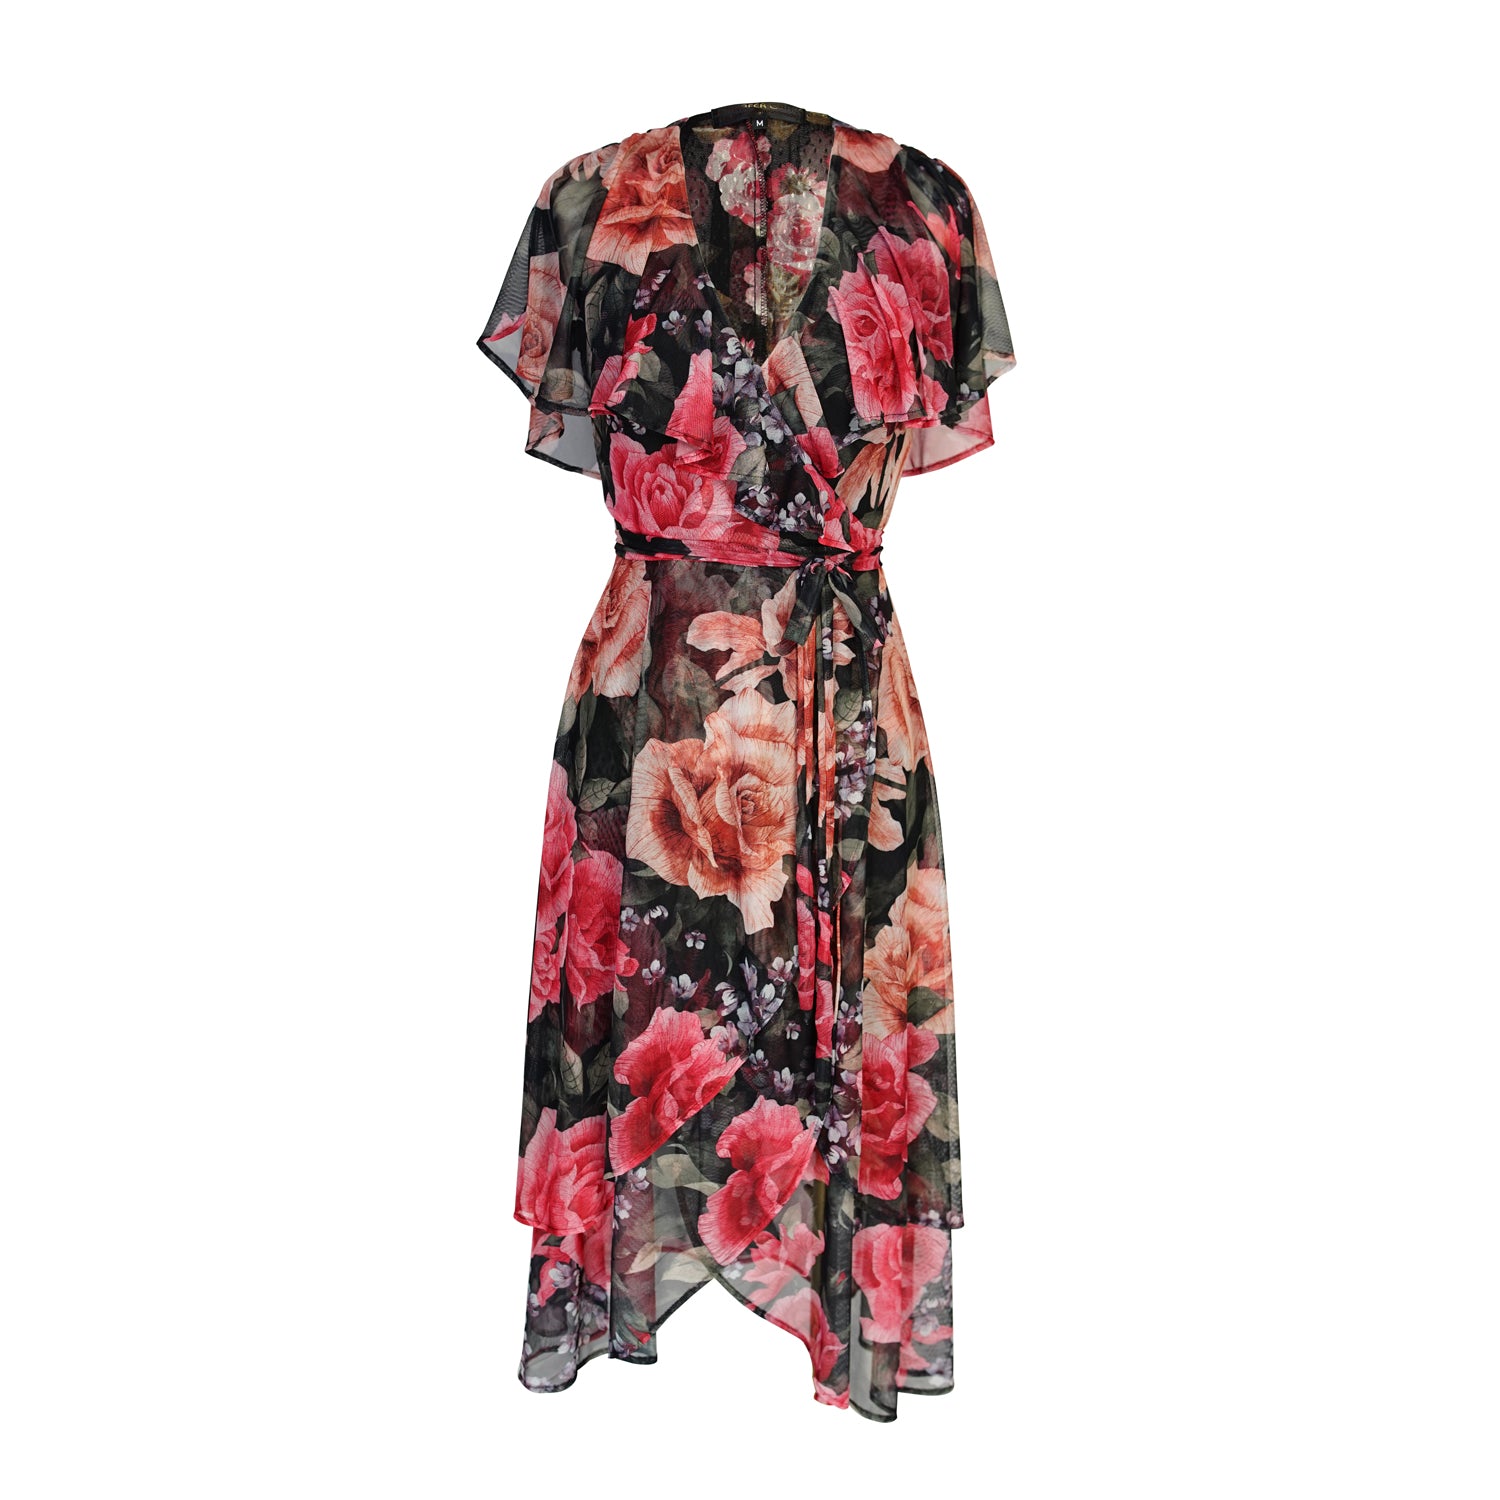 jennafer grace Rosalina Flutter Wrap Dress black mesh with floral dusty blush rose pink coral pink and sage green flower print v-neck cinched waist midi dress boho bohemian hippie romantic whimsical handmade in California USA